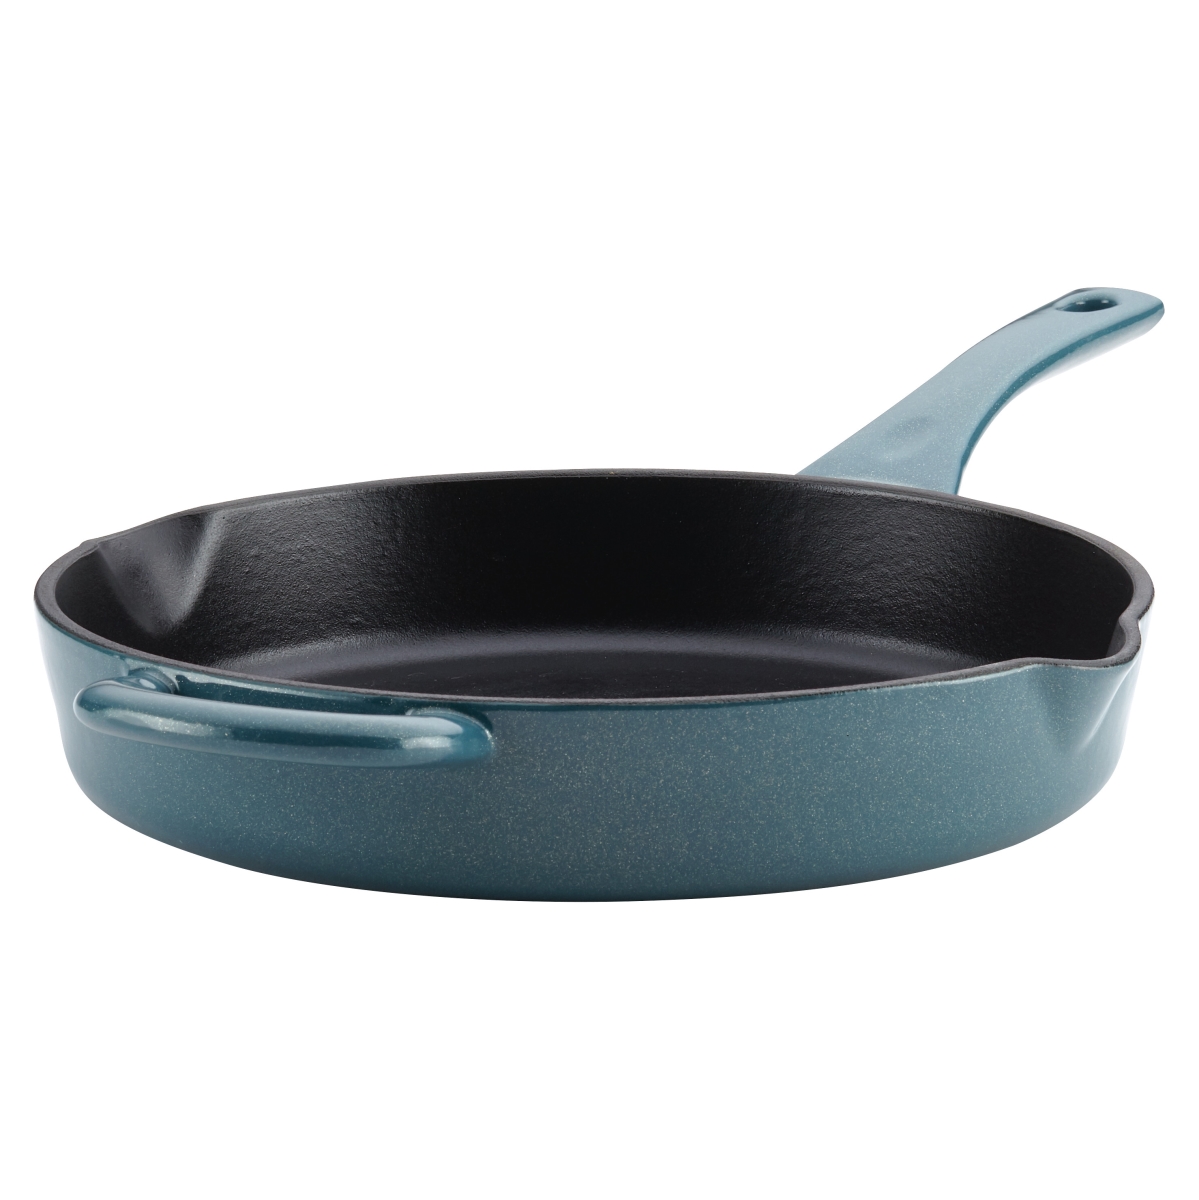 46957 Cast Iron Enamel Skillet With Pour Spouts, 10 In. - Twilight Teal